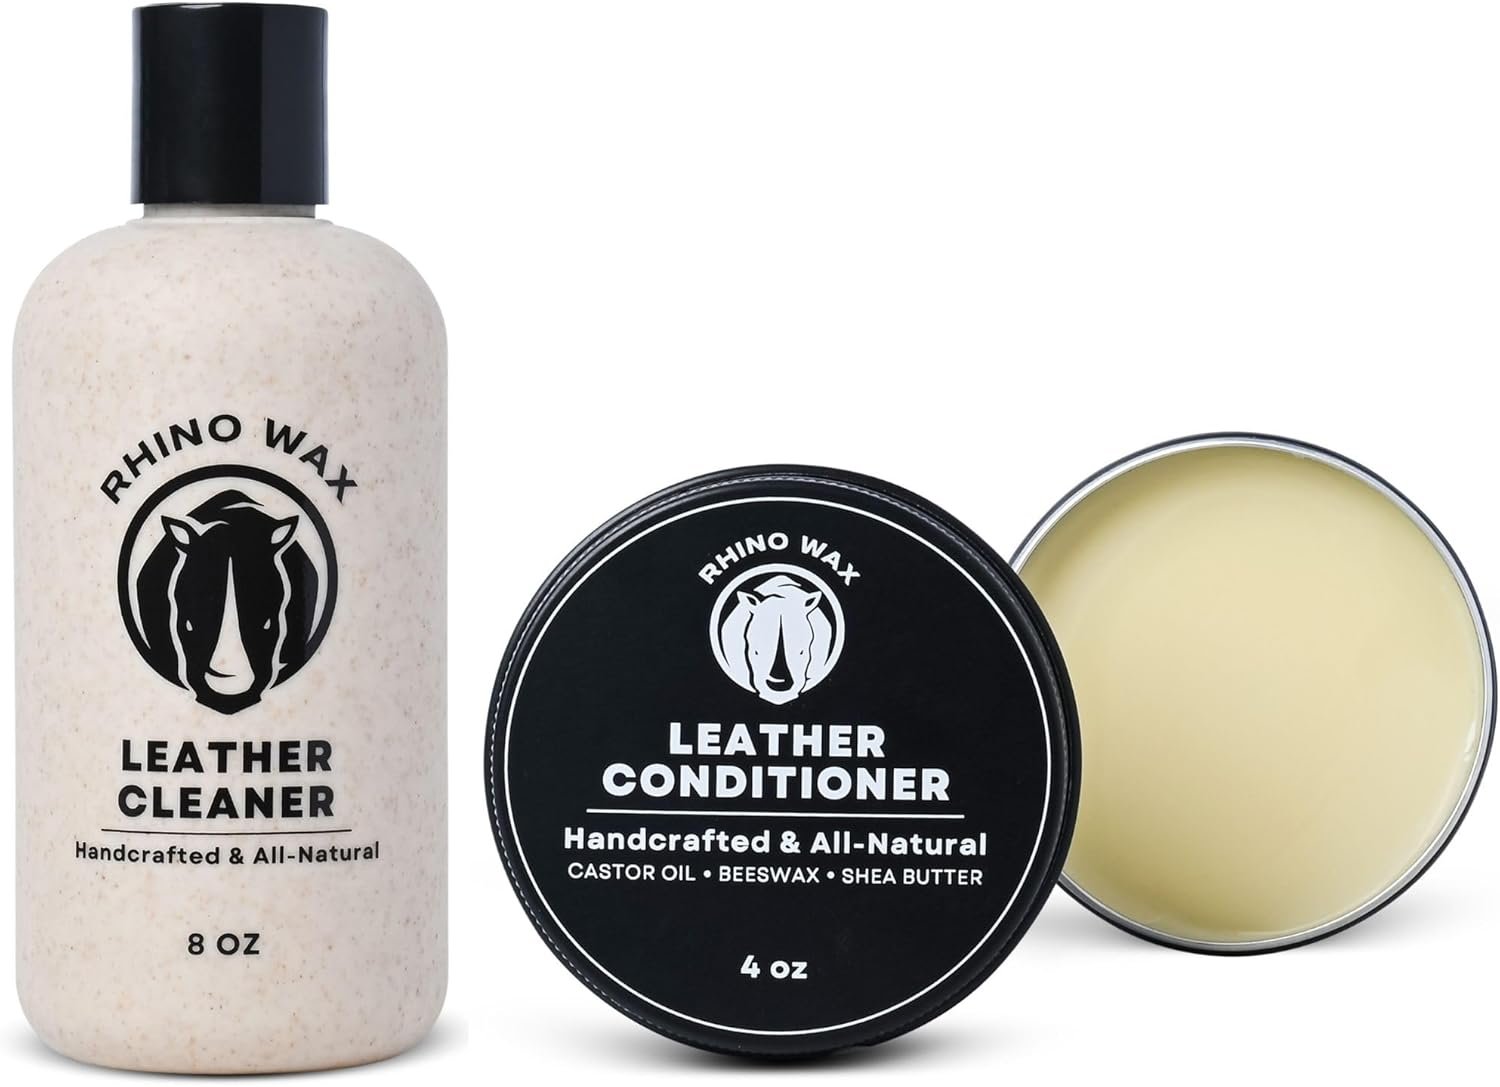 Leather Conditioner Cleaner Review